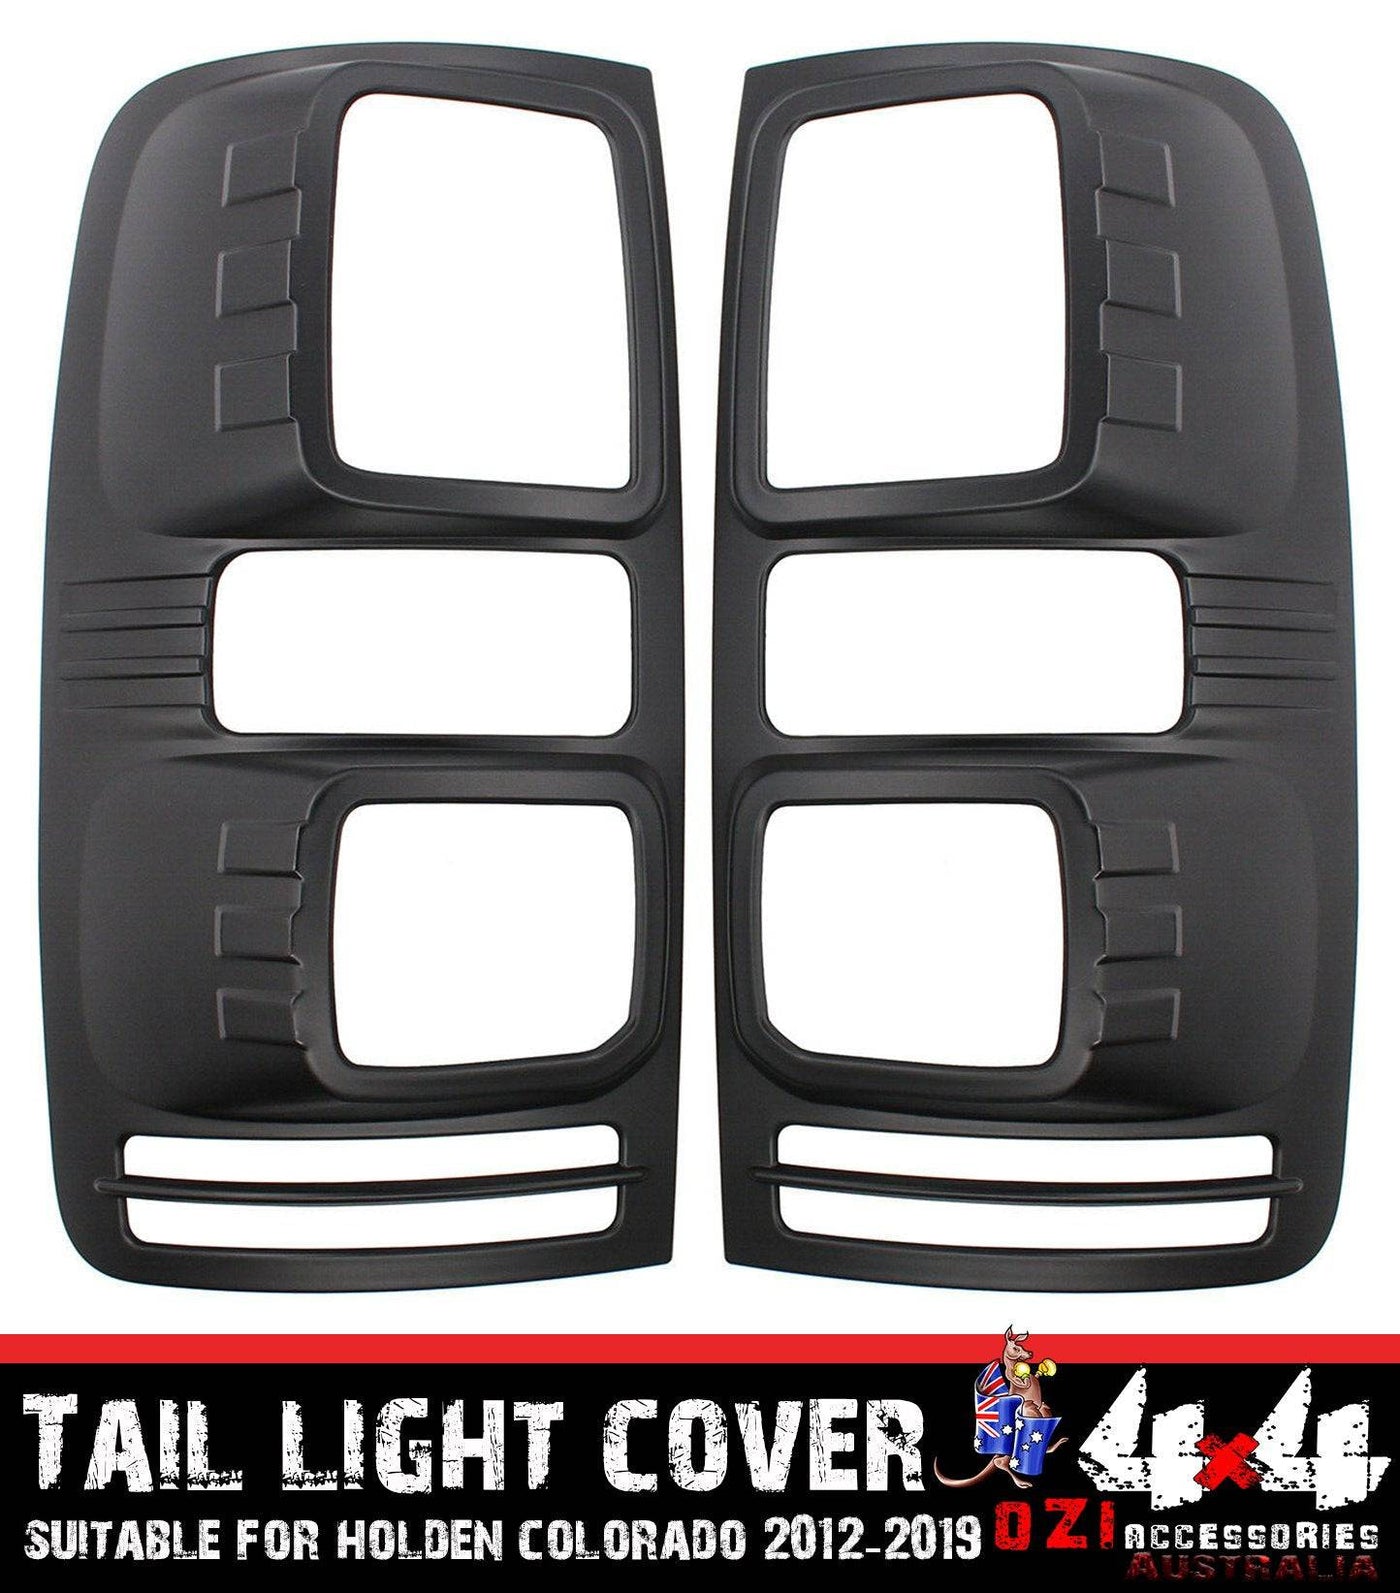 Tail Light Cover Protector Suits Holden Colorado 2012-2019 (Online Only)